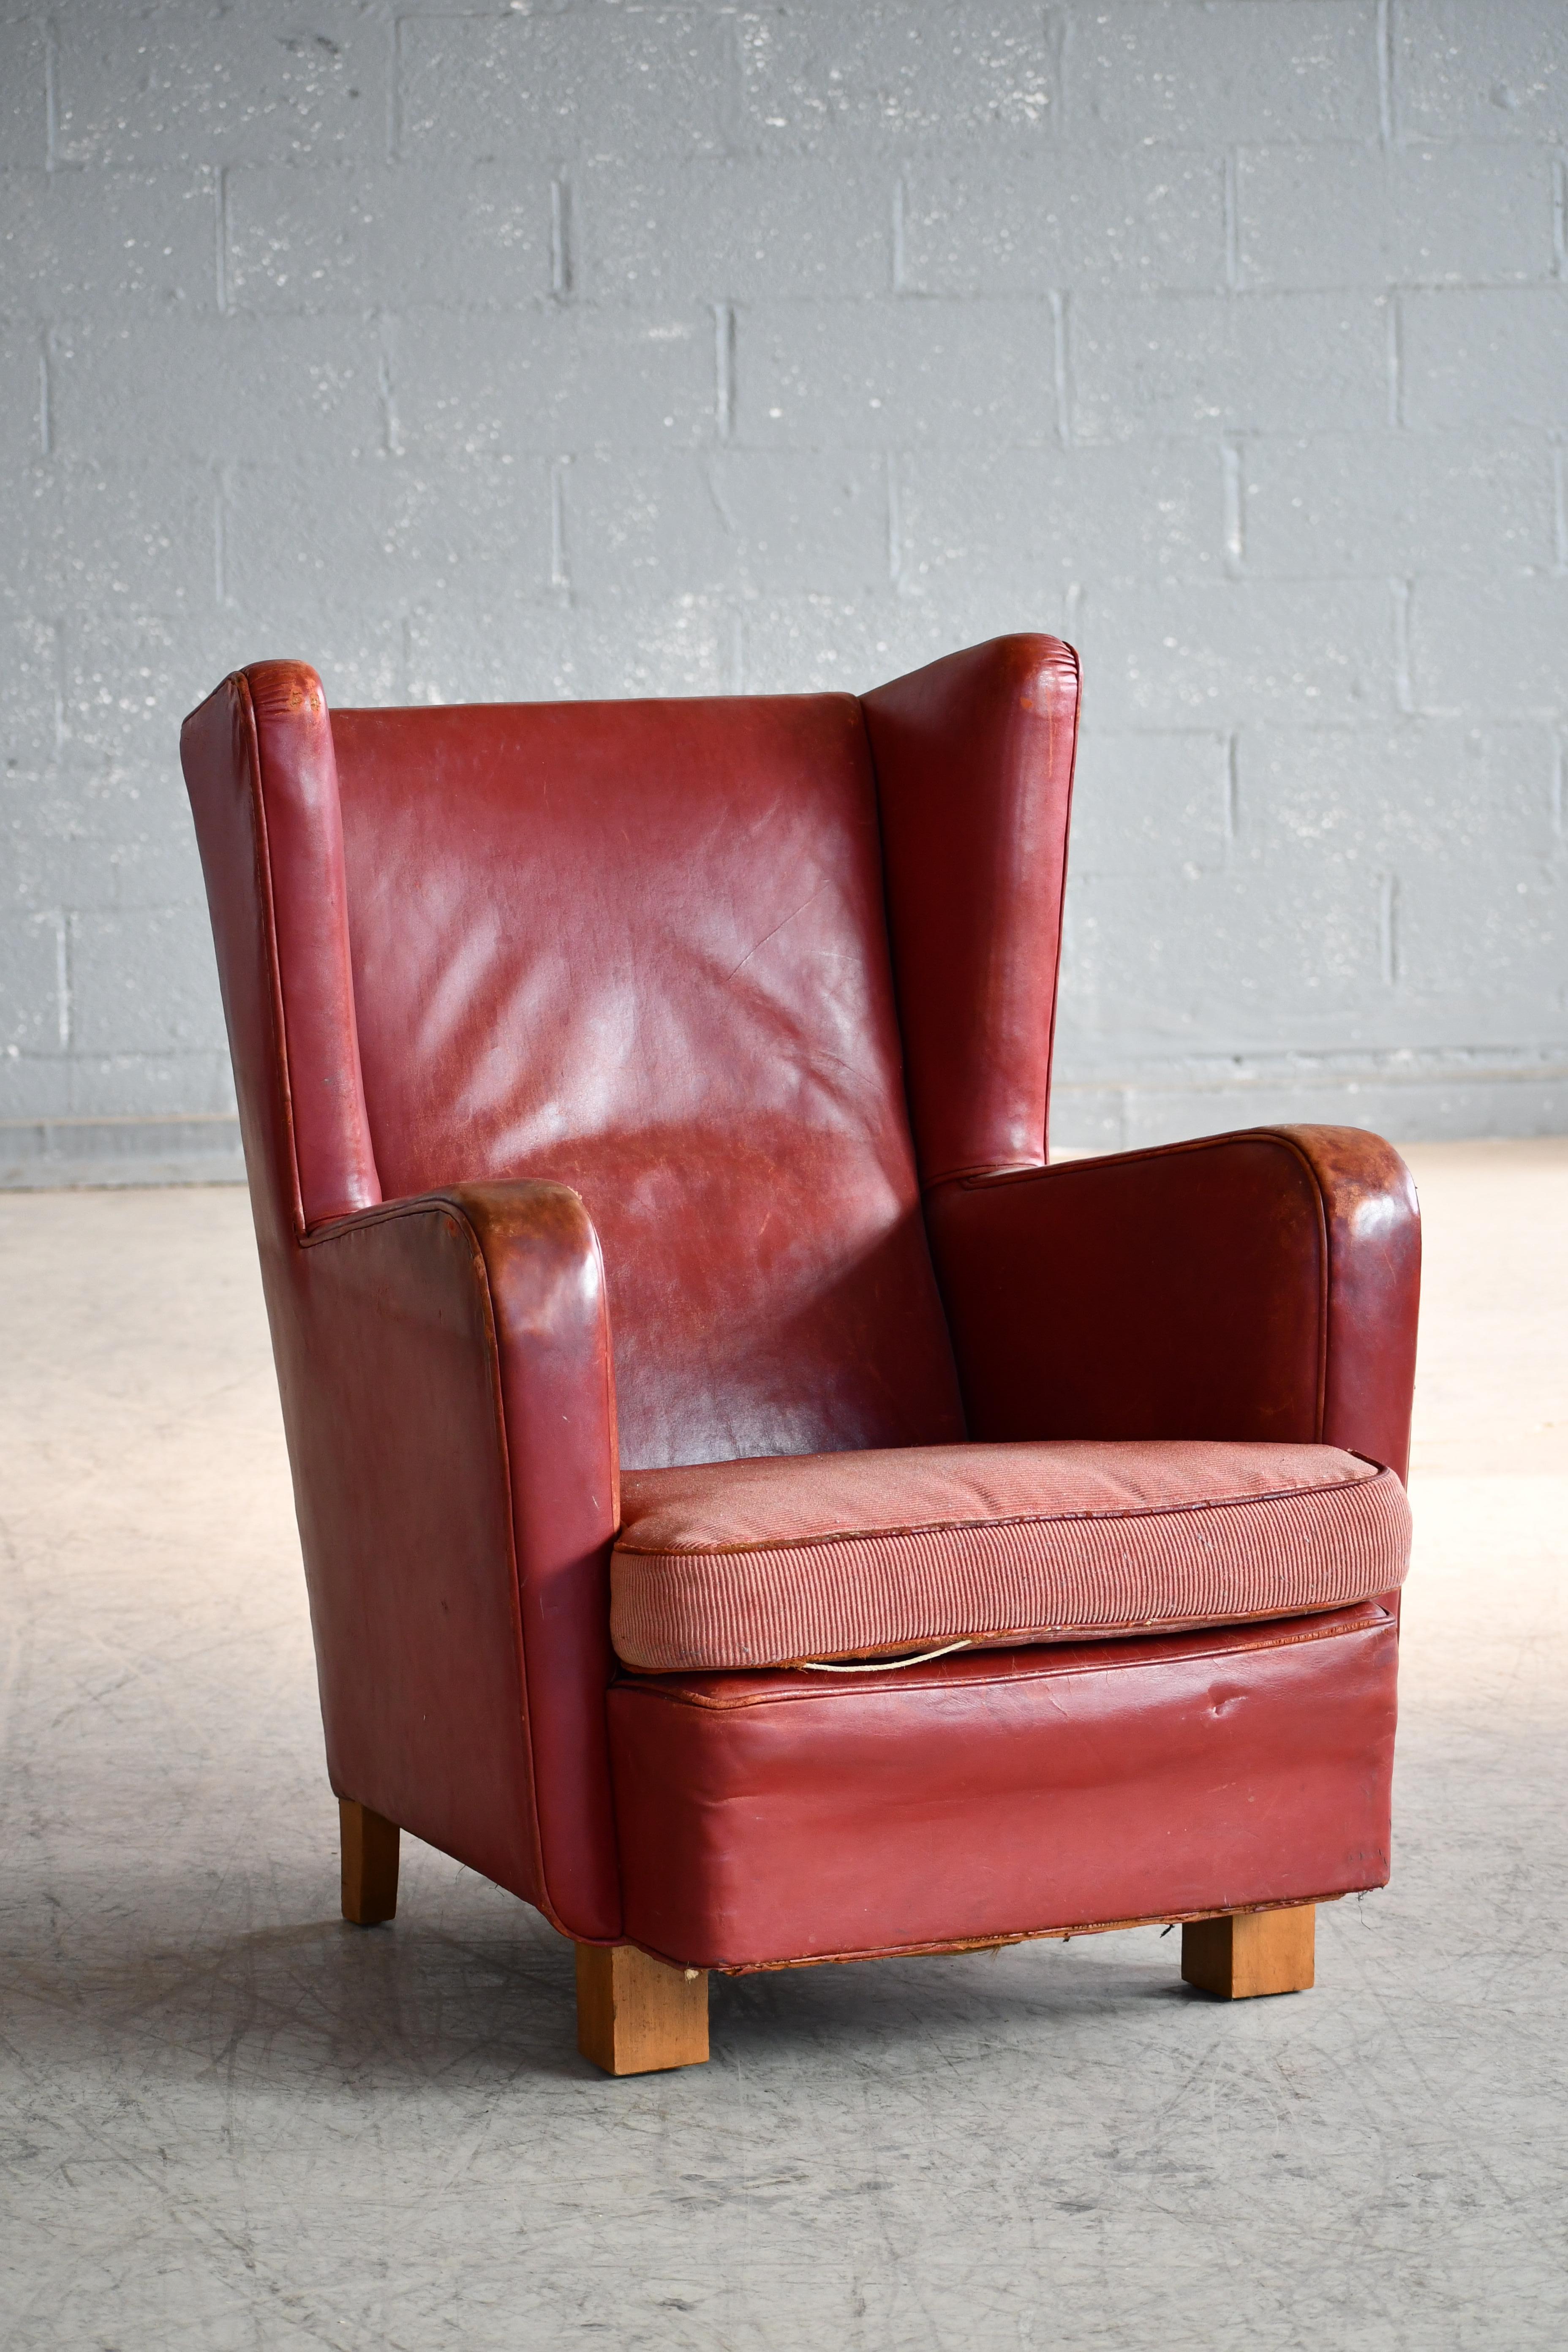 Danish 1940s Pair of Club Chairs in Reddish Leather  In Good Condition For Sale In Bridgeport, CT